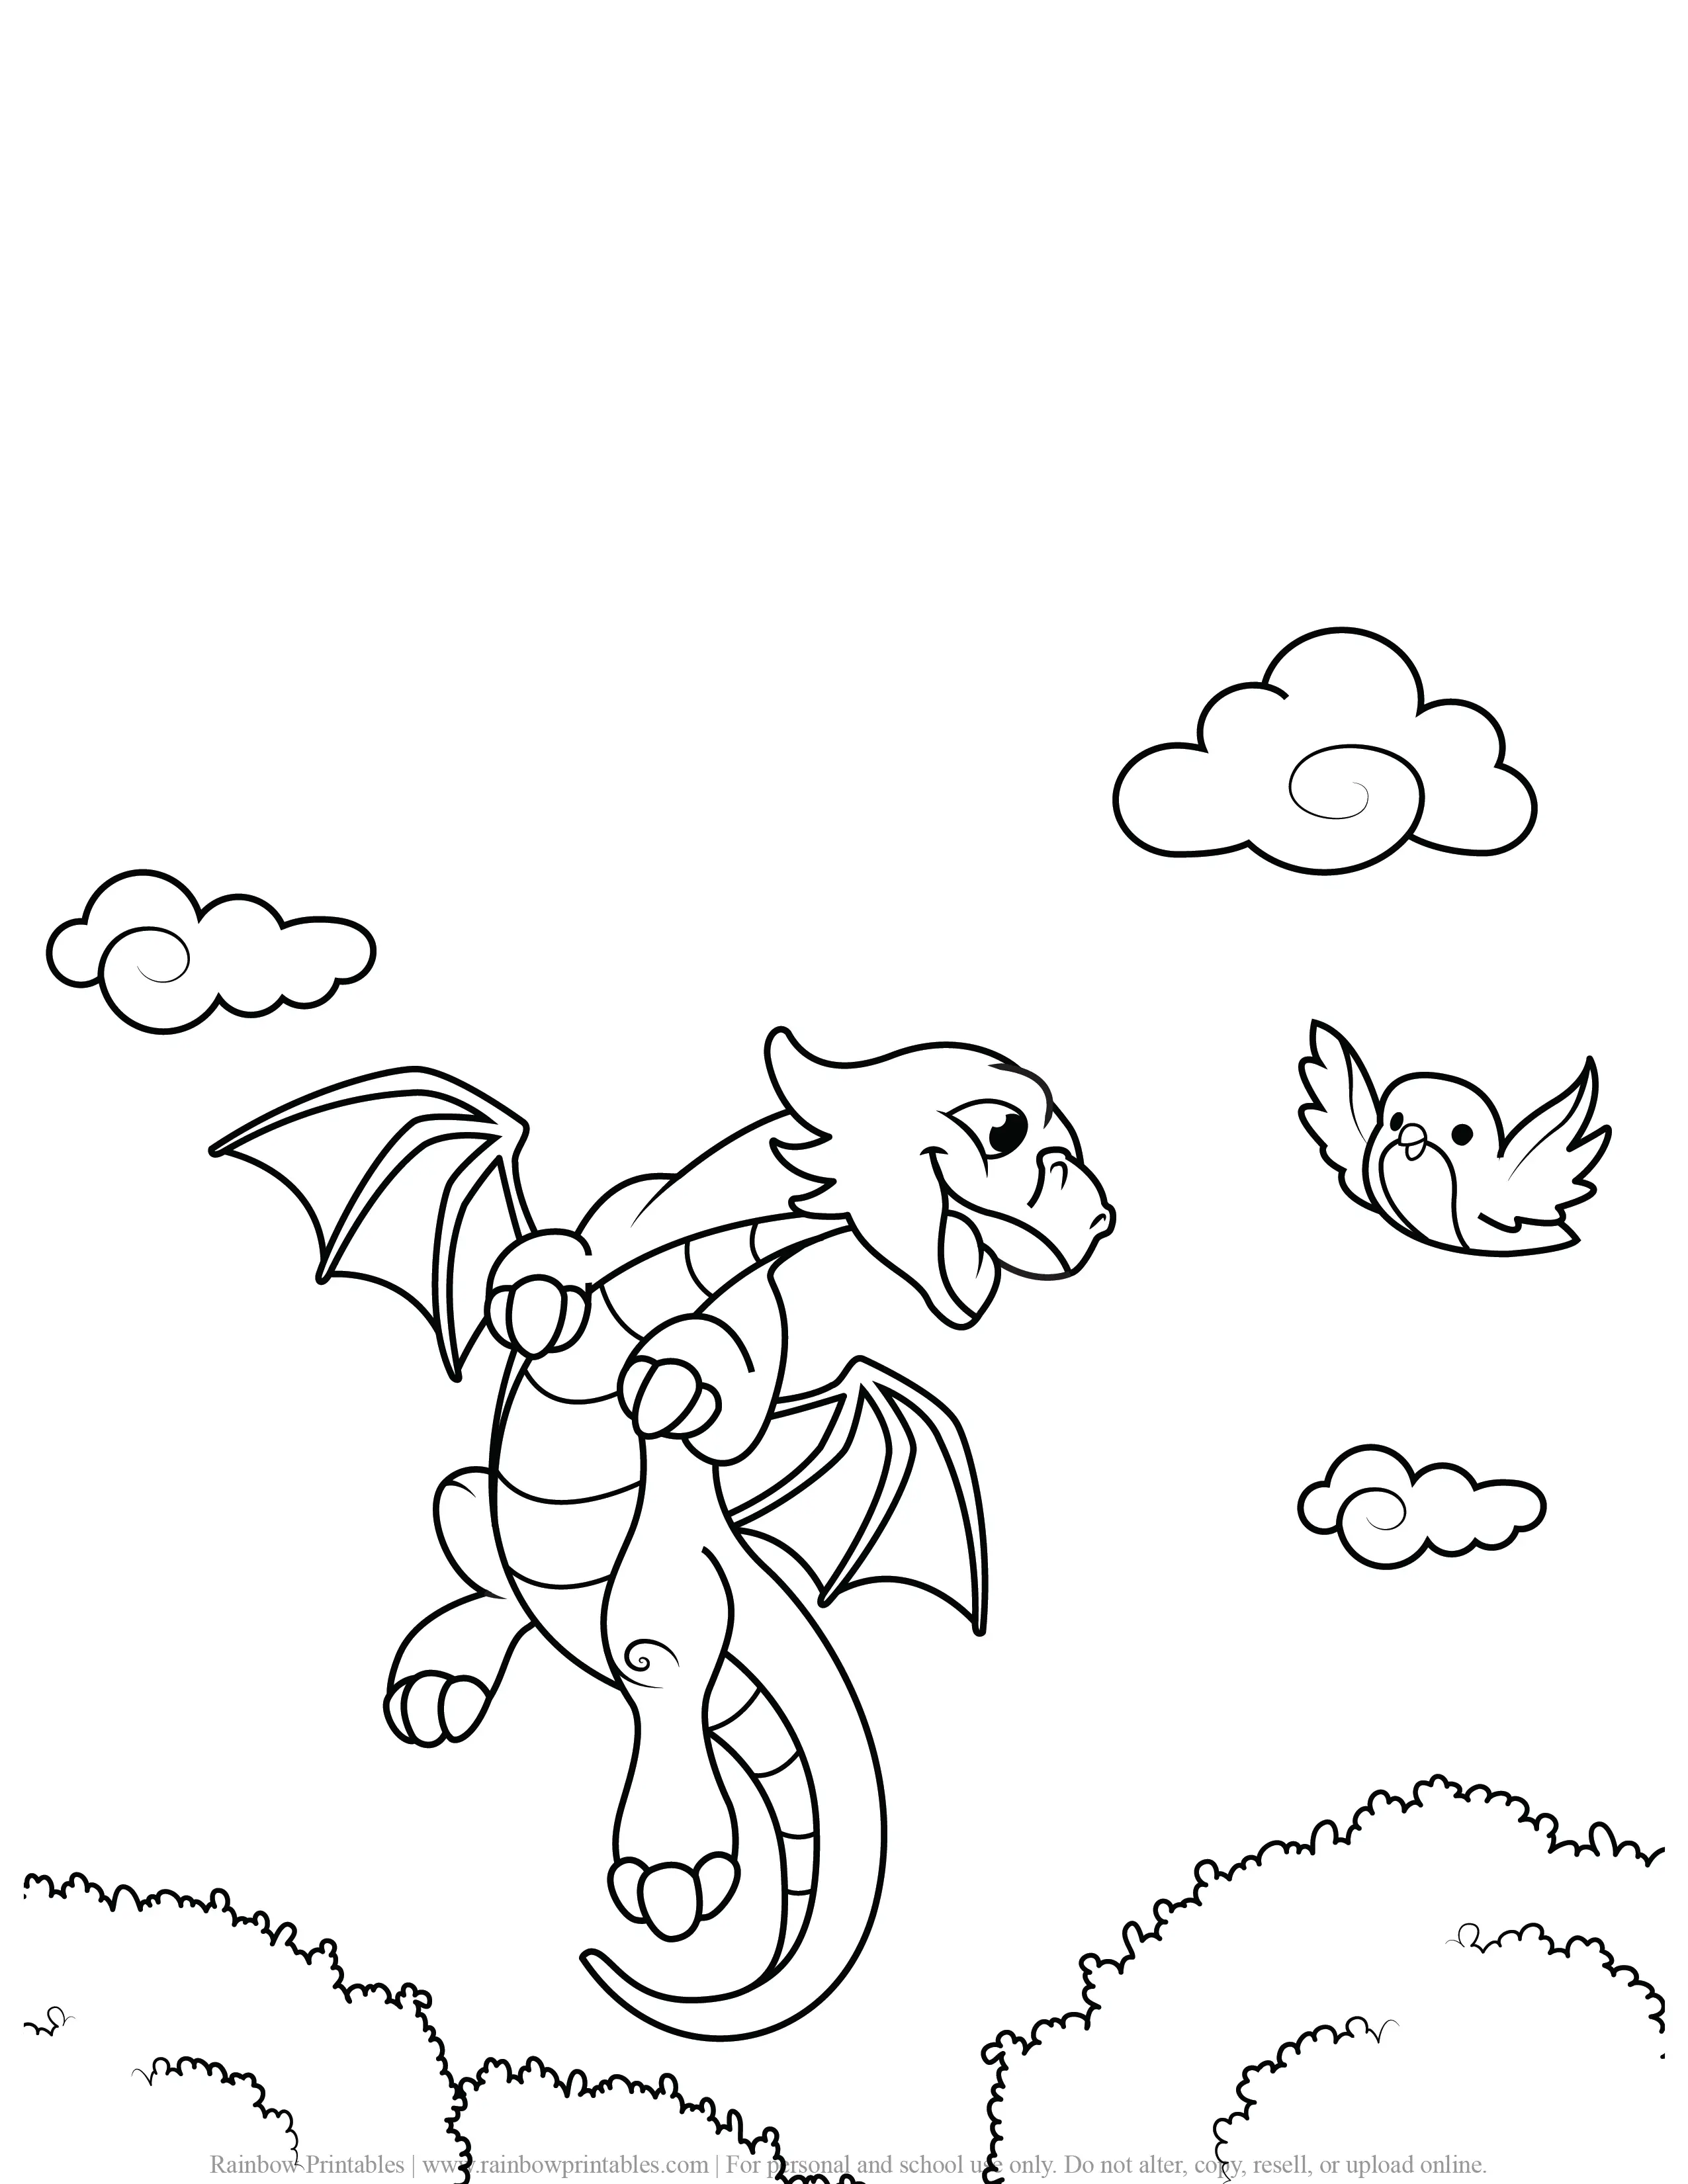 FREE DRAGON COLORING PAGES FOR BOYS KIDS PRINTABLE